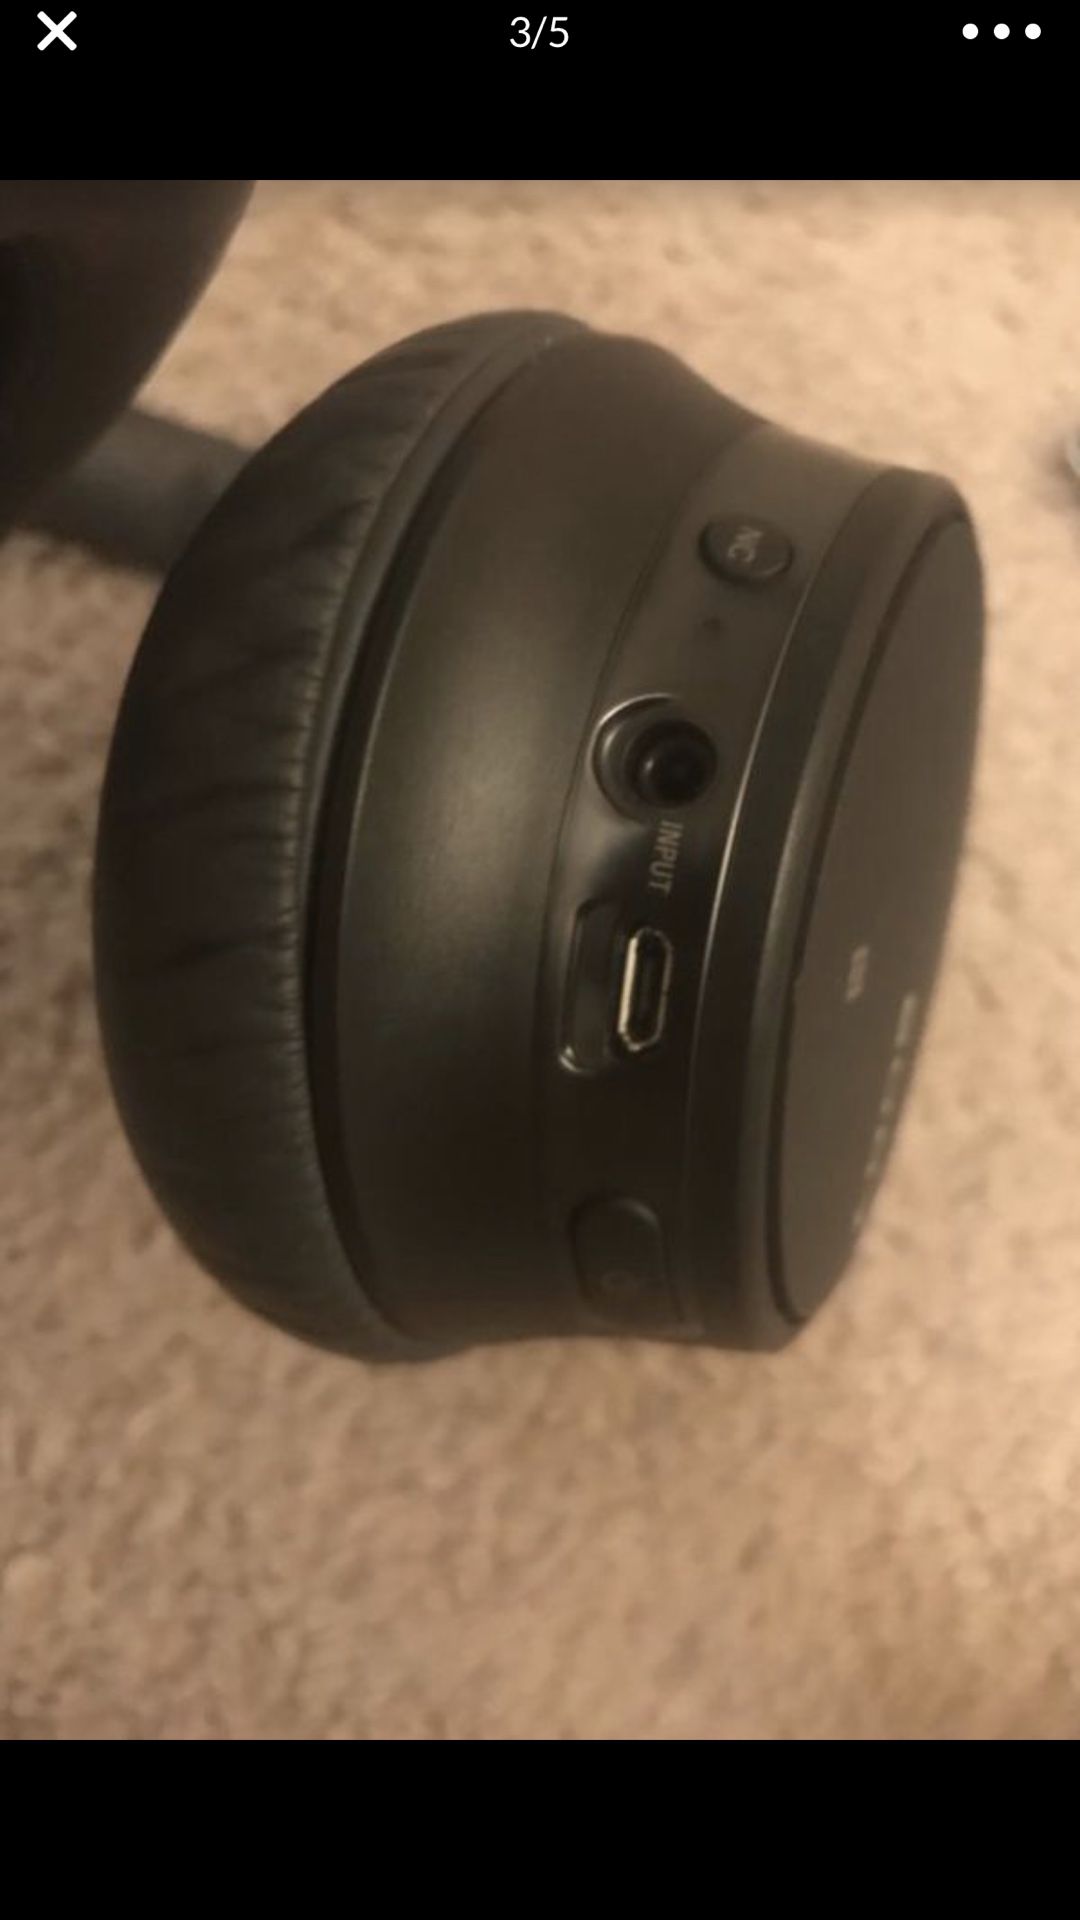 sony noise Canceling headphones up to 35 hr